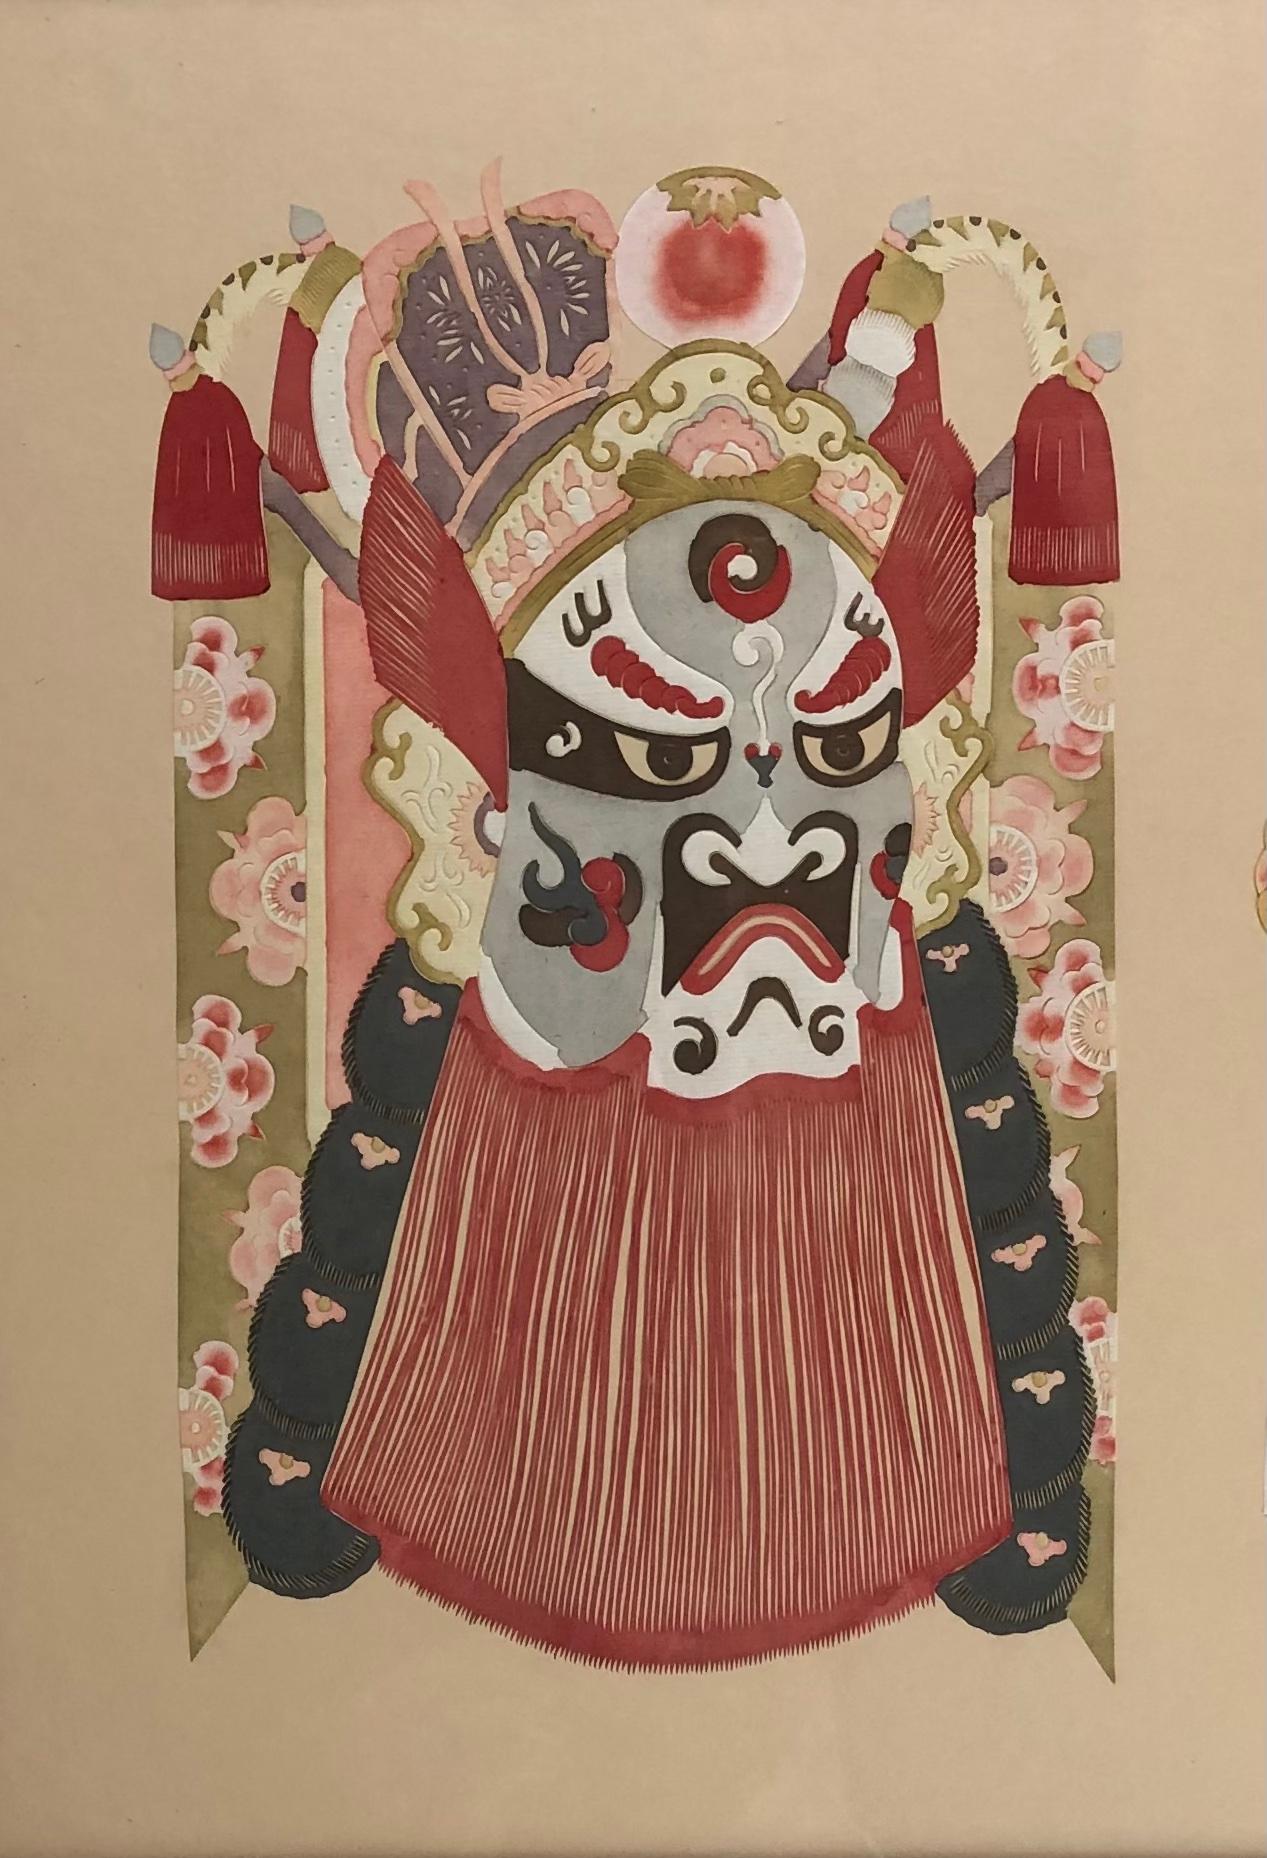 A generously sized decorative Chinese framed mixed media depiction of 5 ceremonial deity masks, 20th Century. This large wall hanging mixed media of ceremonial deity masks is made of intricately cut paper then painted with watercolors. 

Very